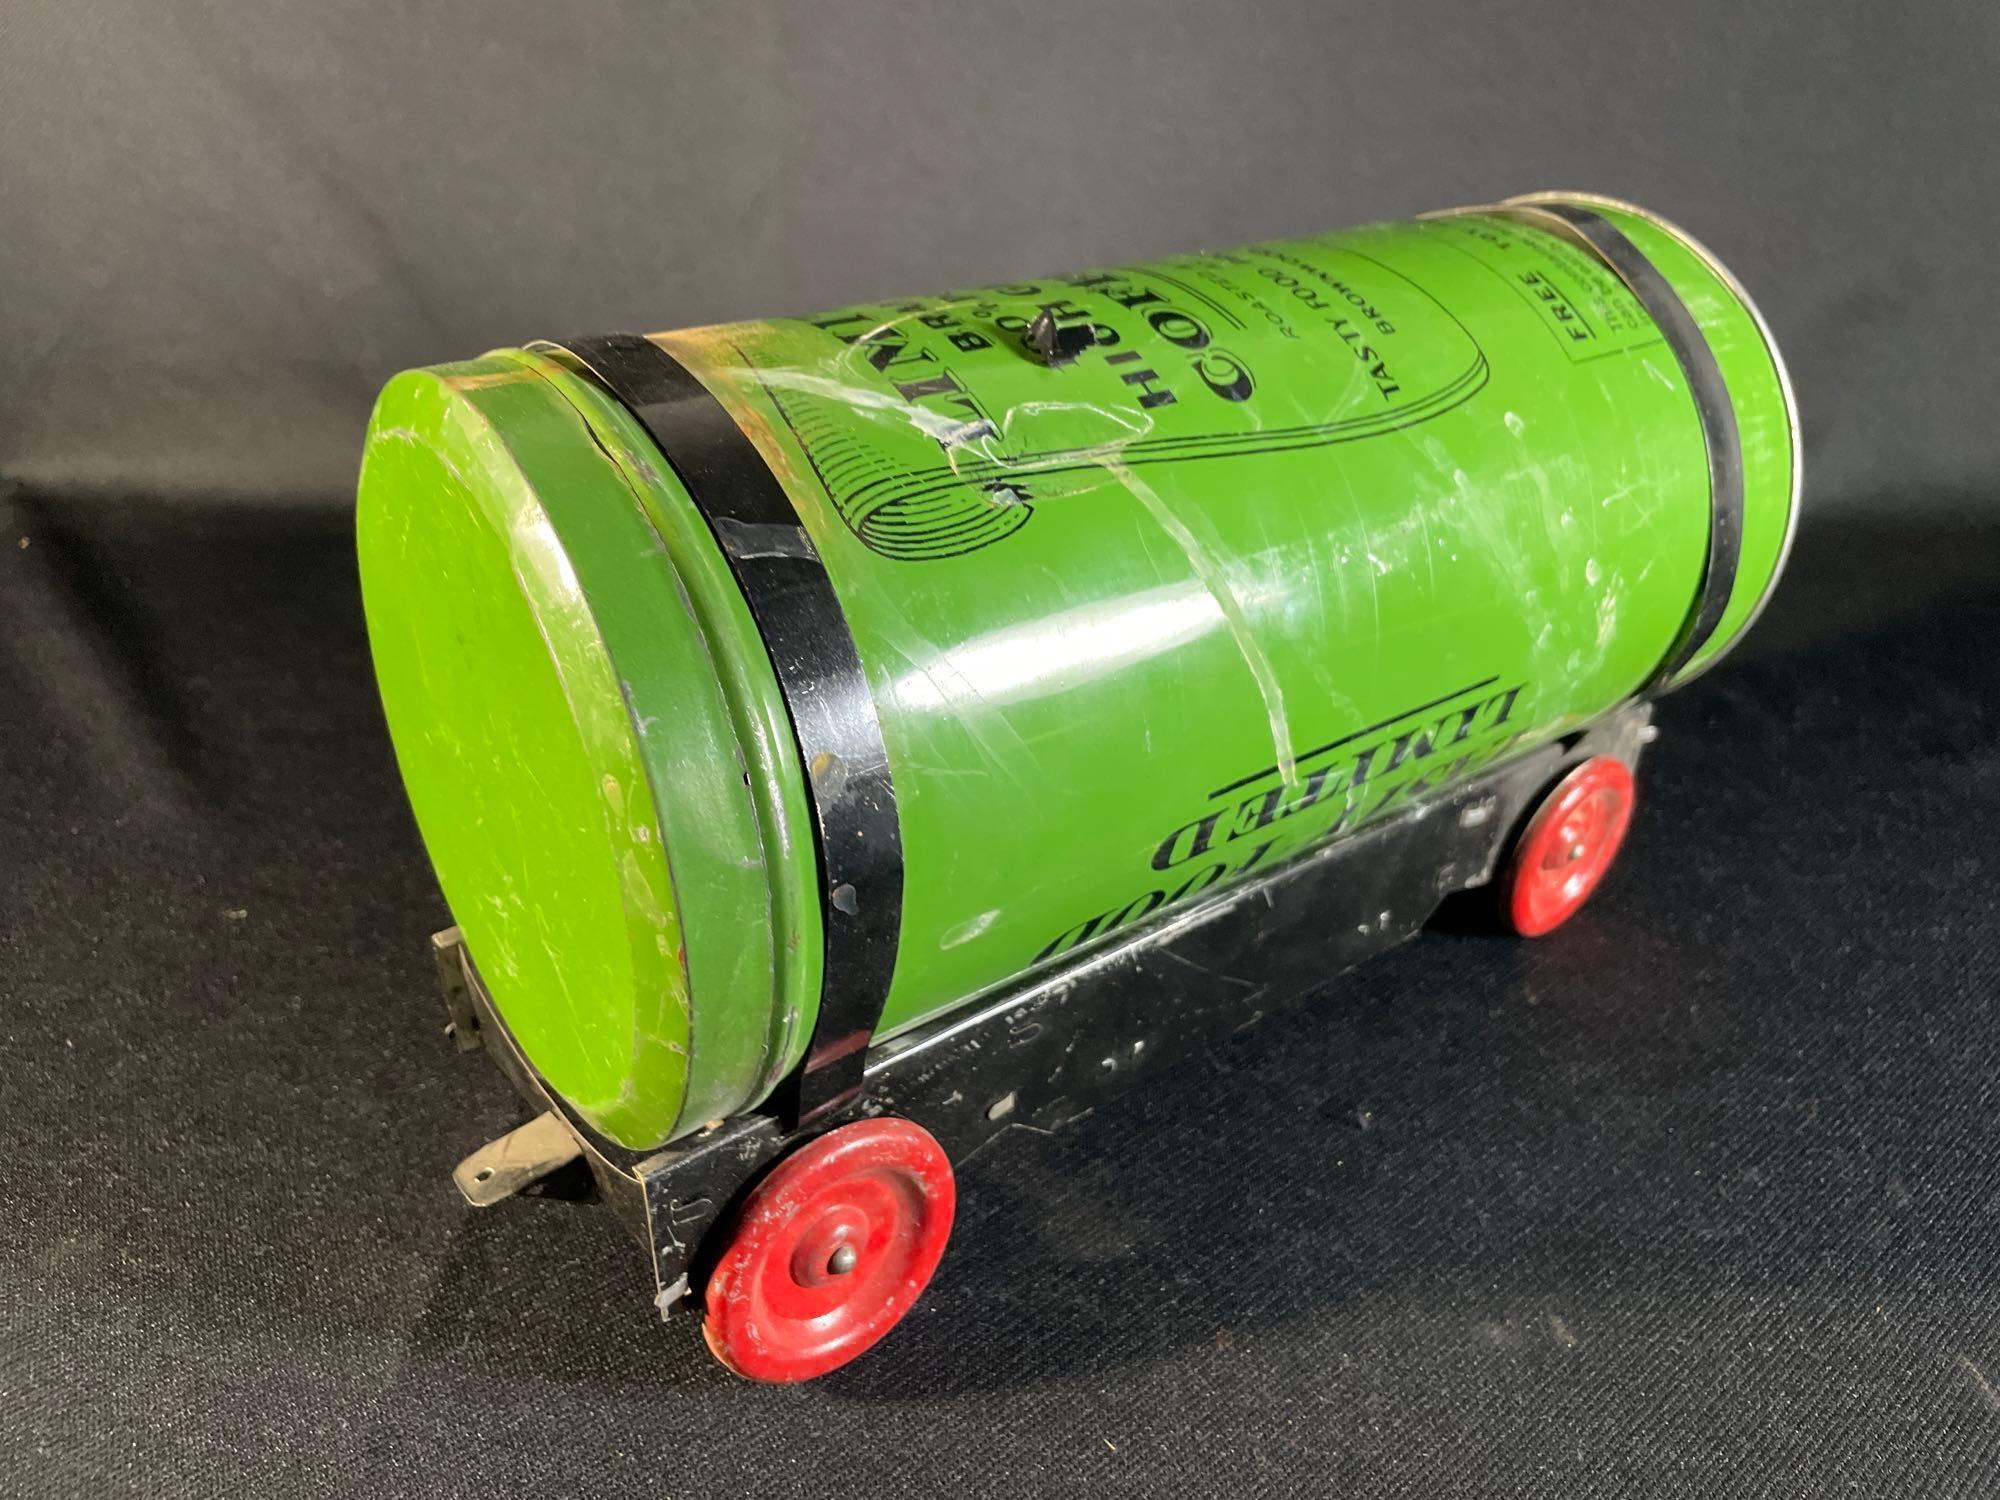 Antique Tasty Food Products CO. coffee tin train set